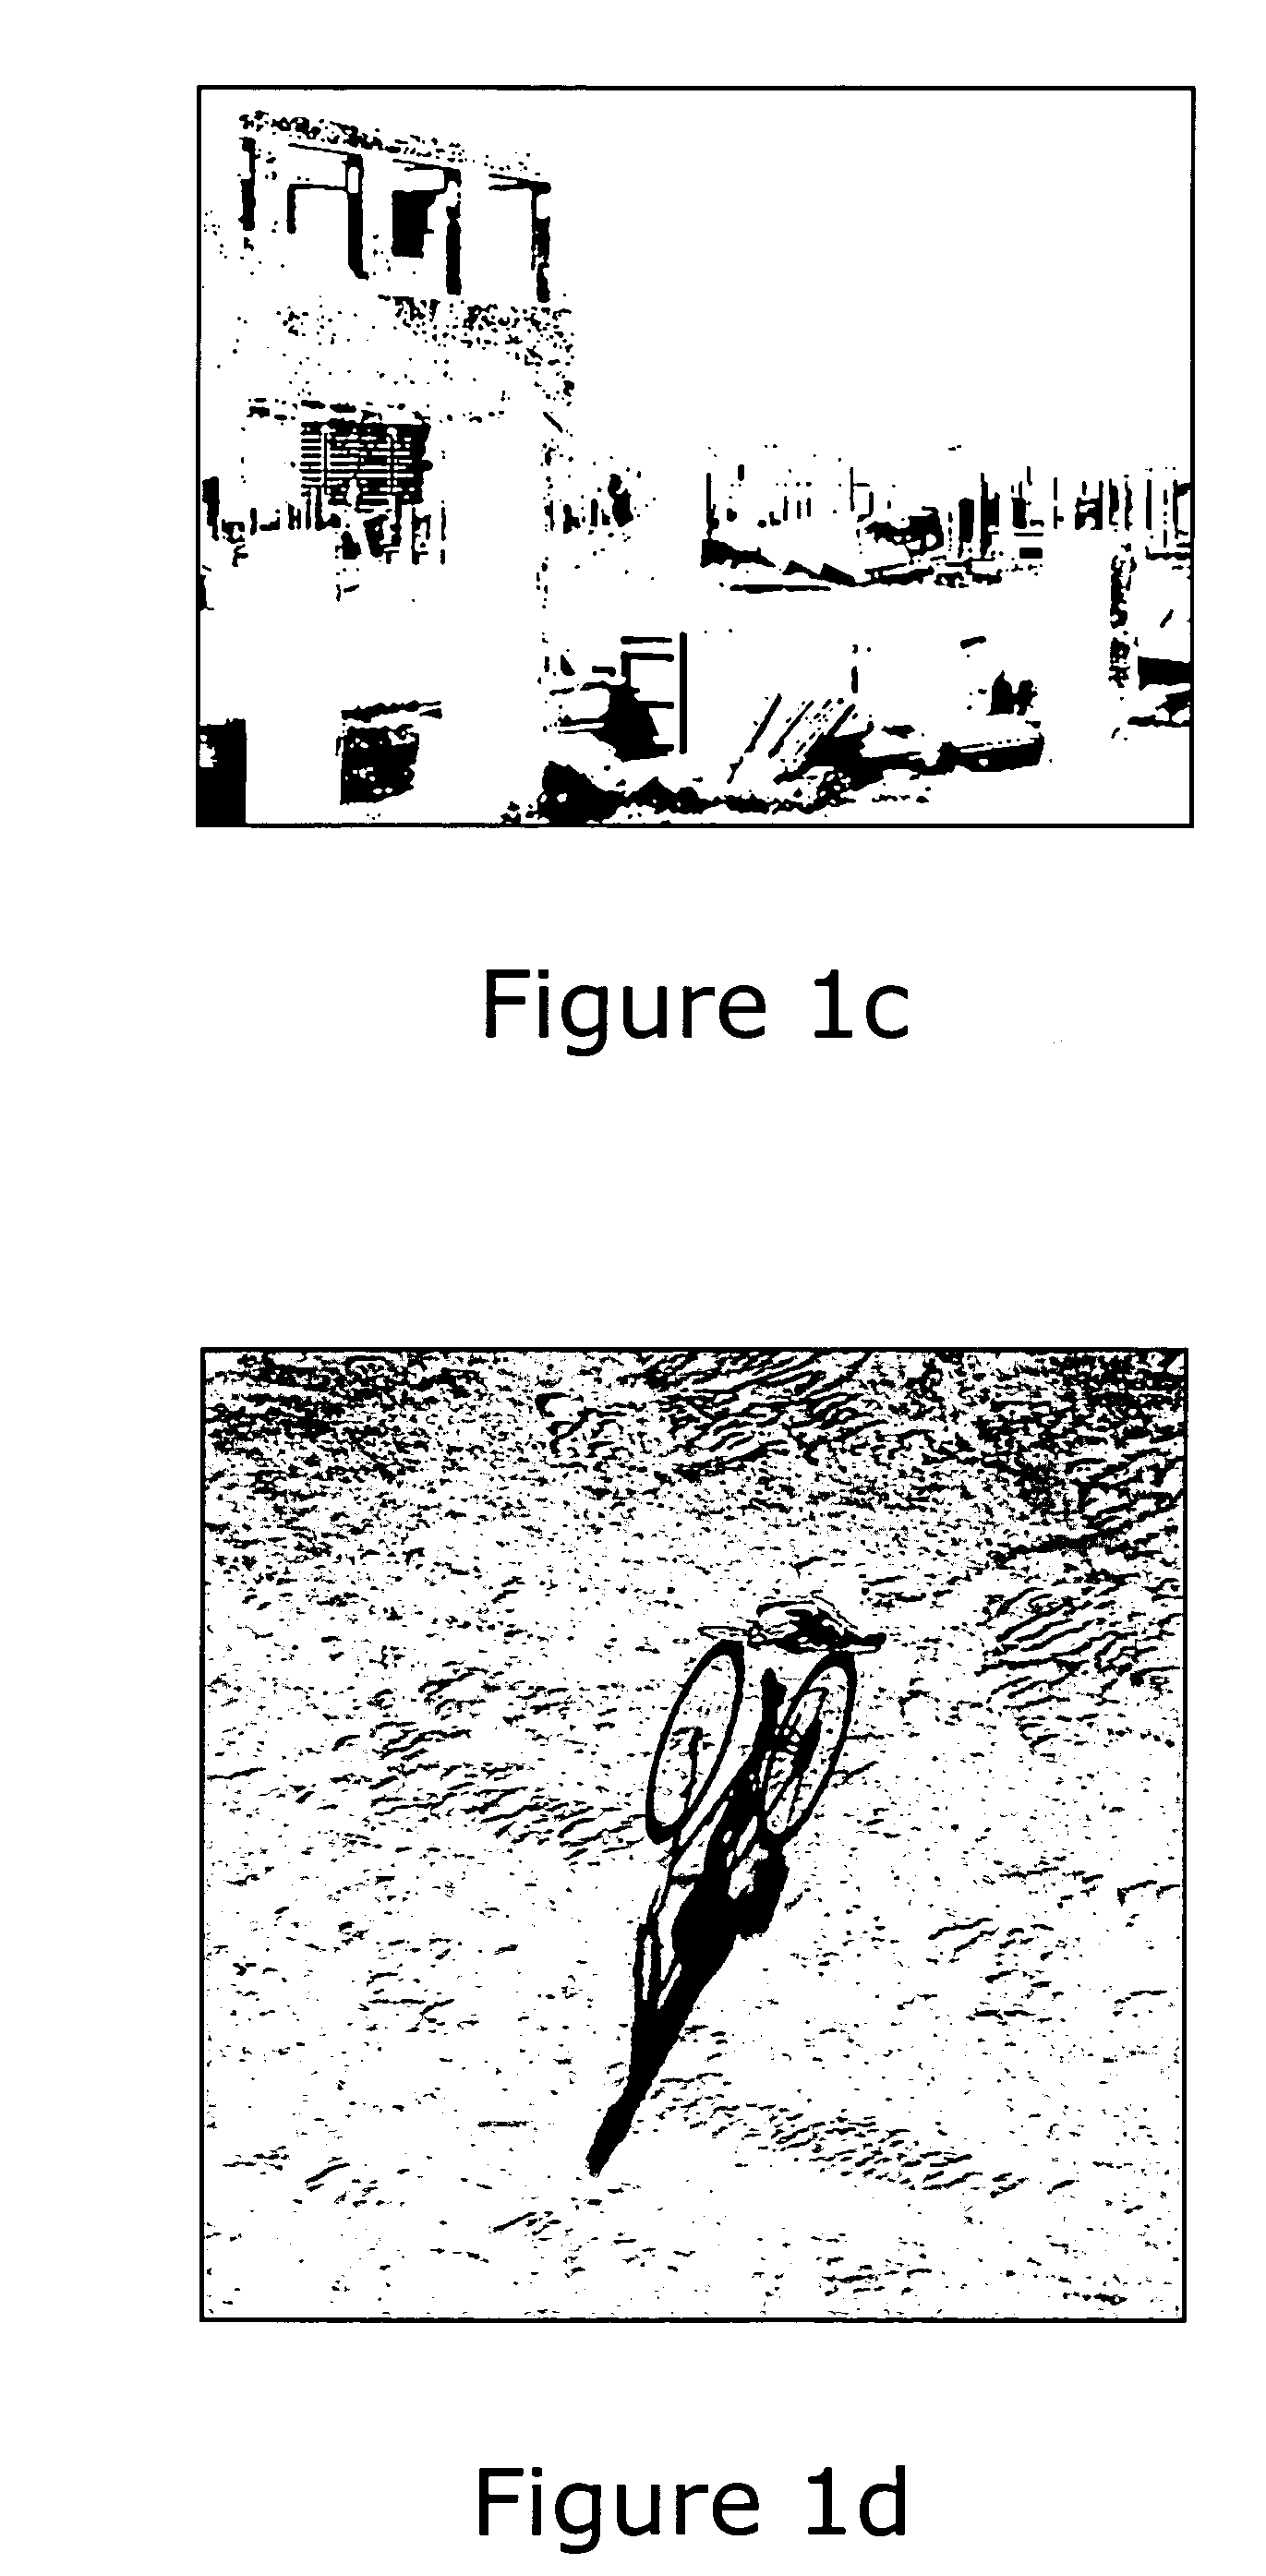 Hierarchical static shadow detection method